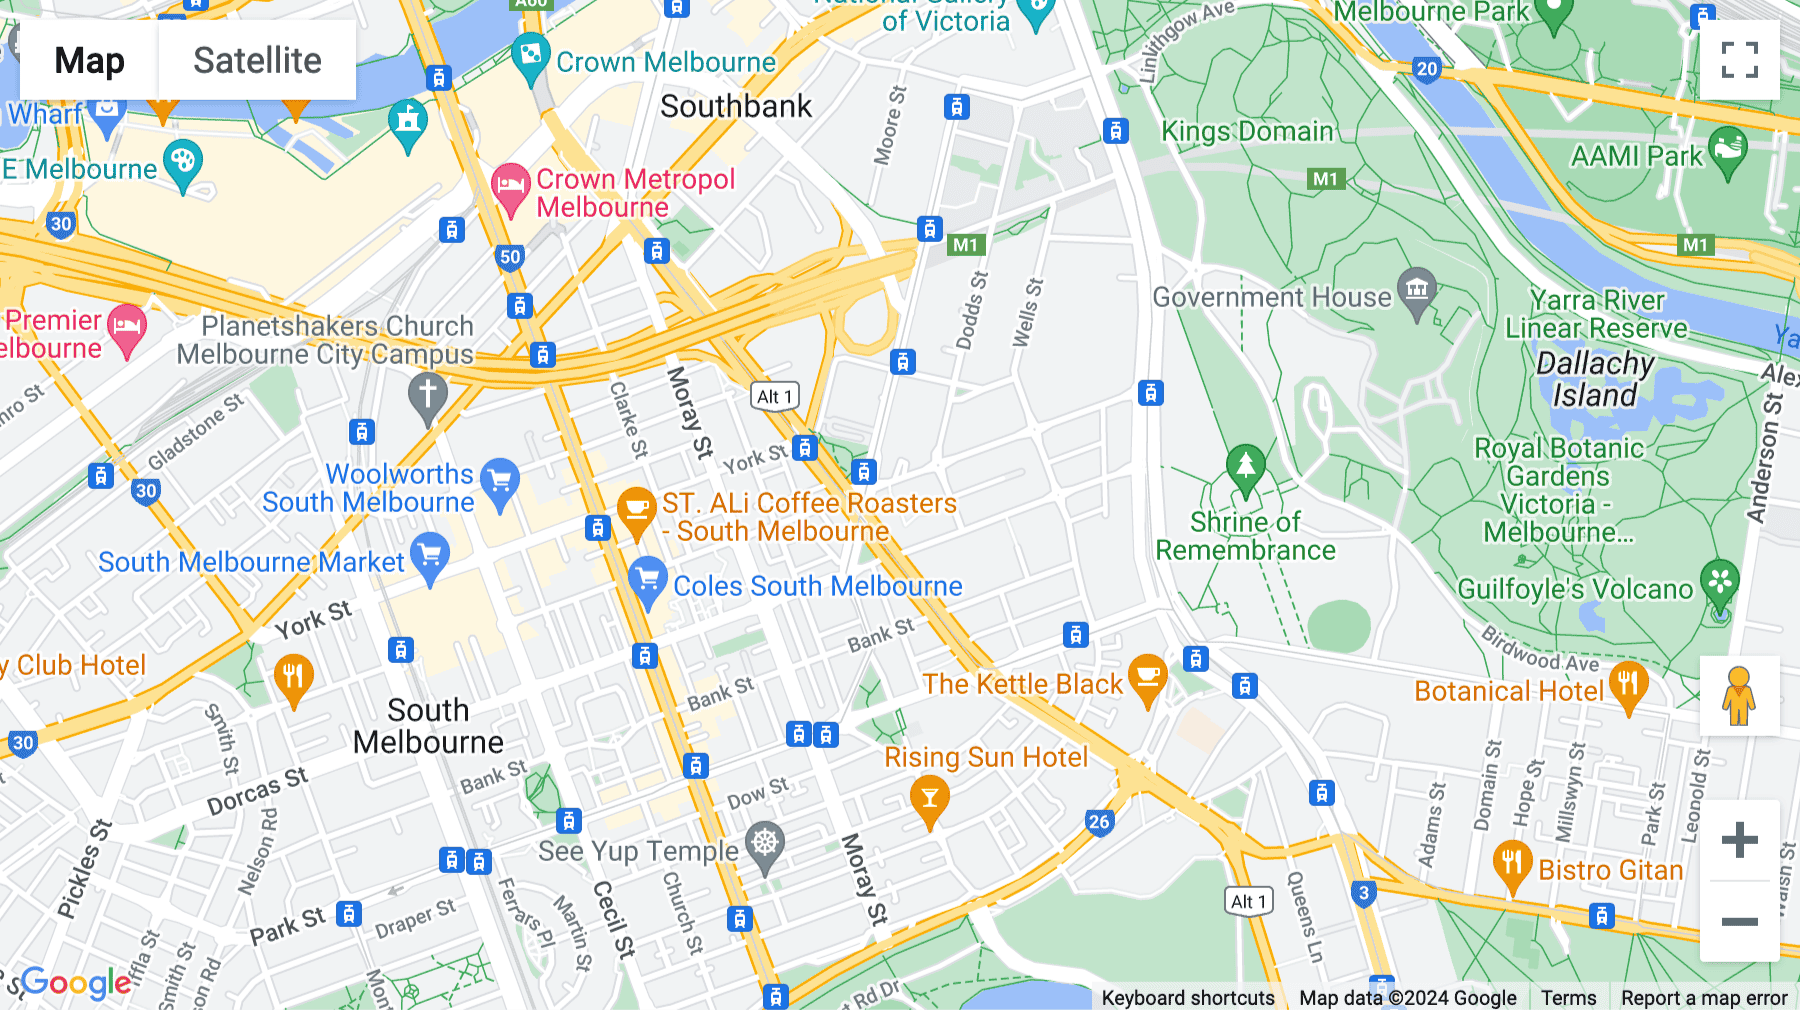 Click for interative map of 95-111 Coventry Street, Southbank, Melbourne